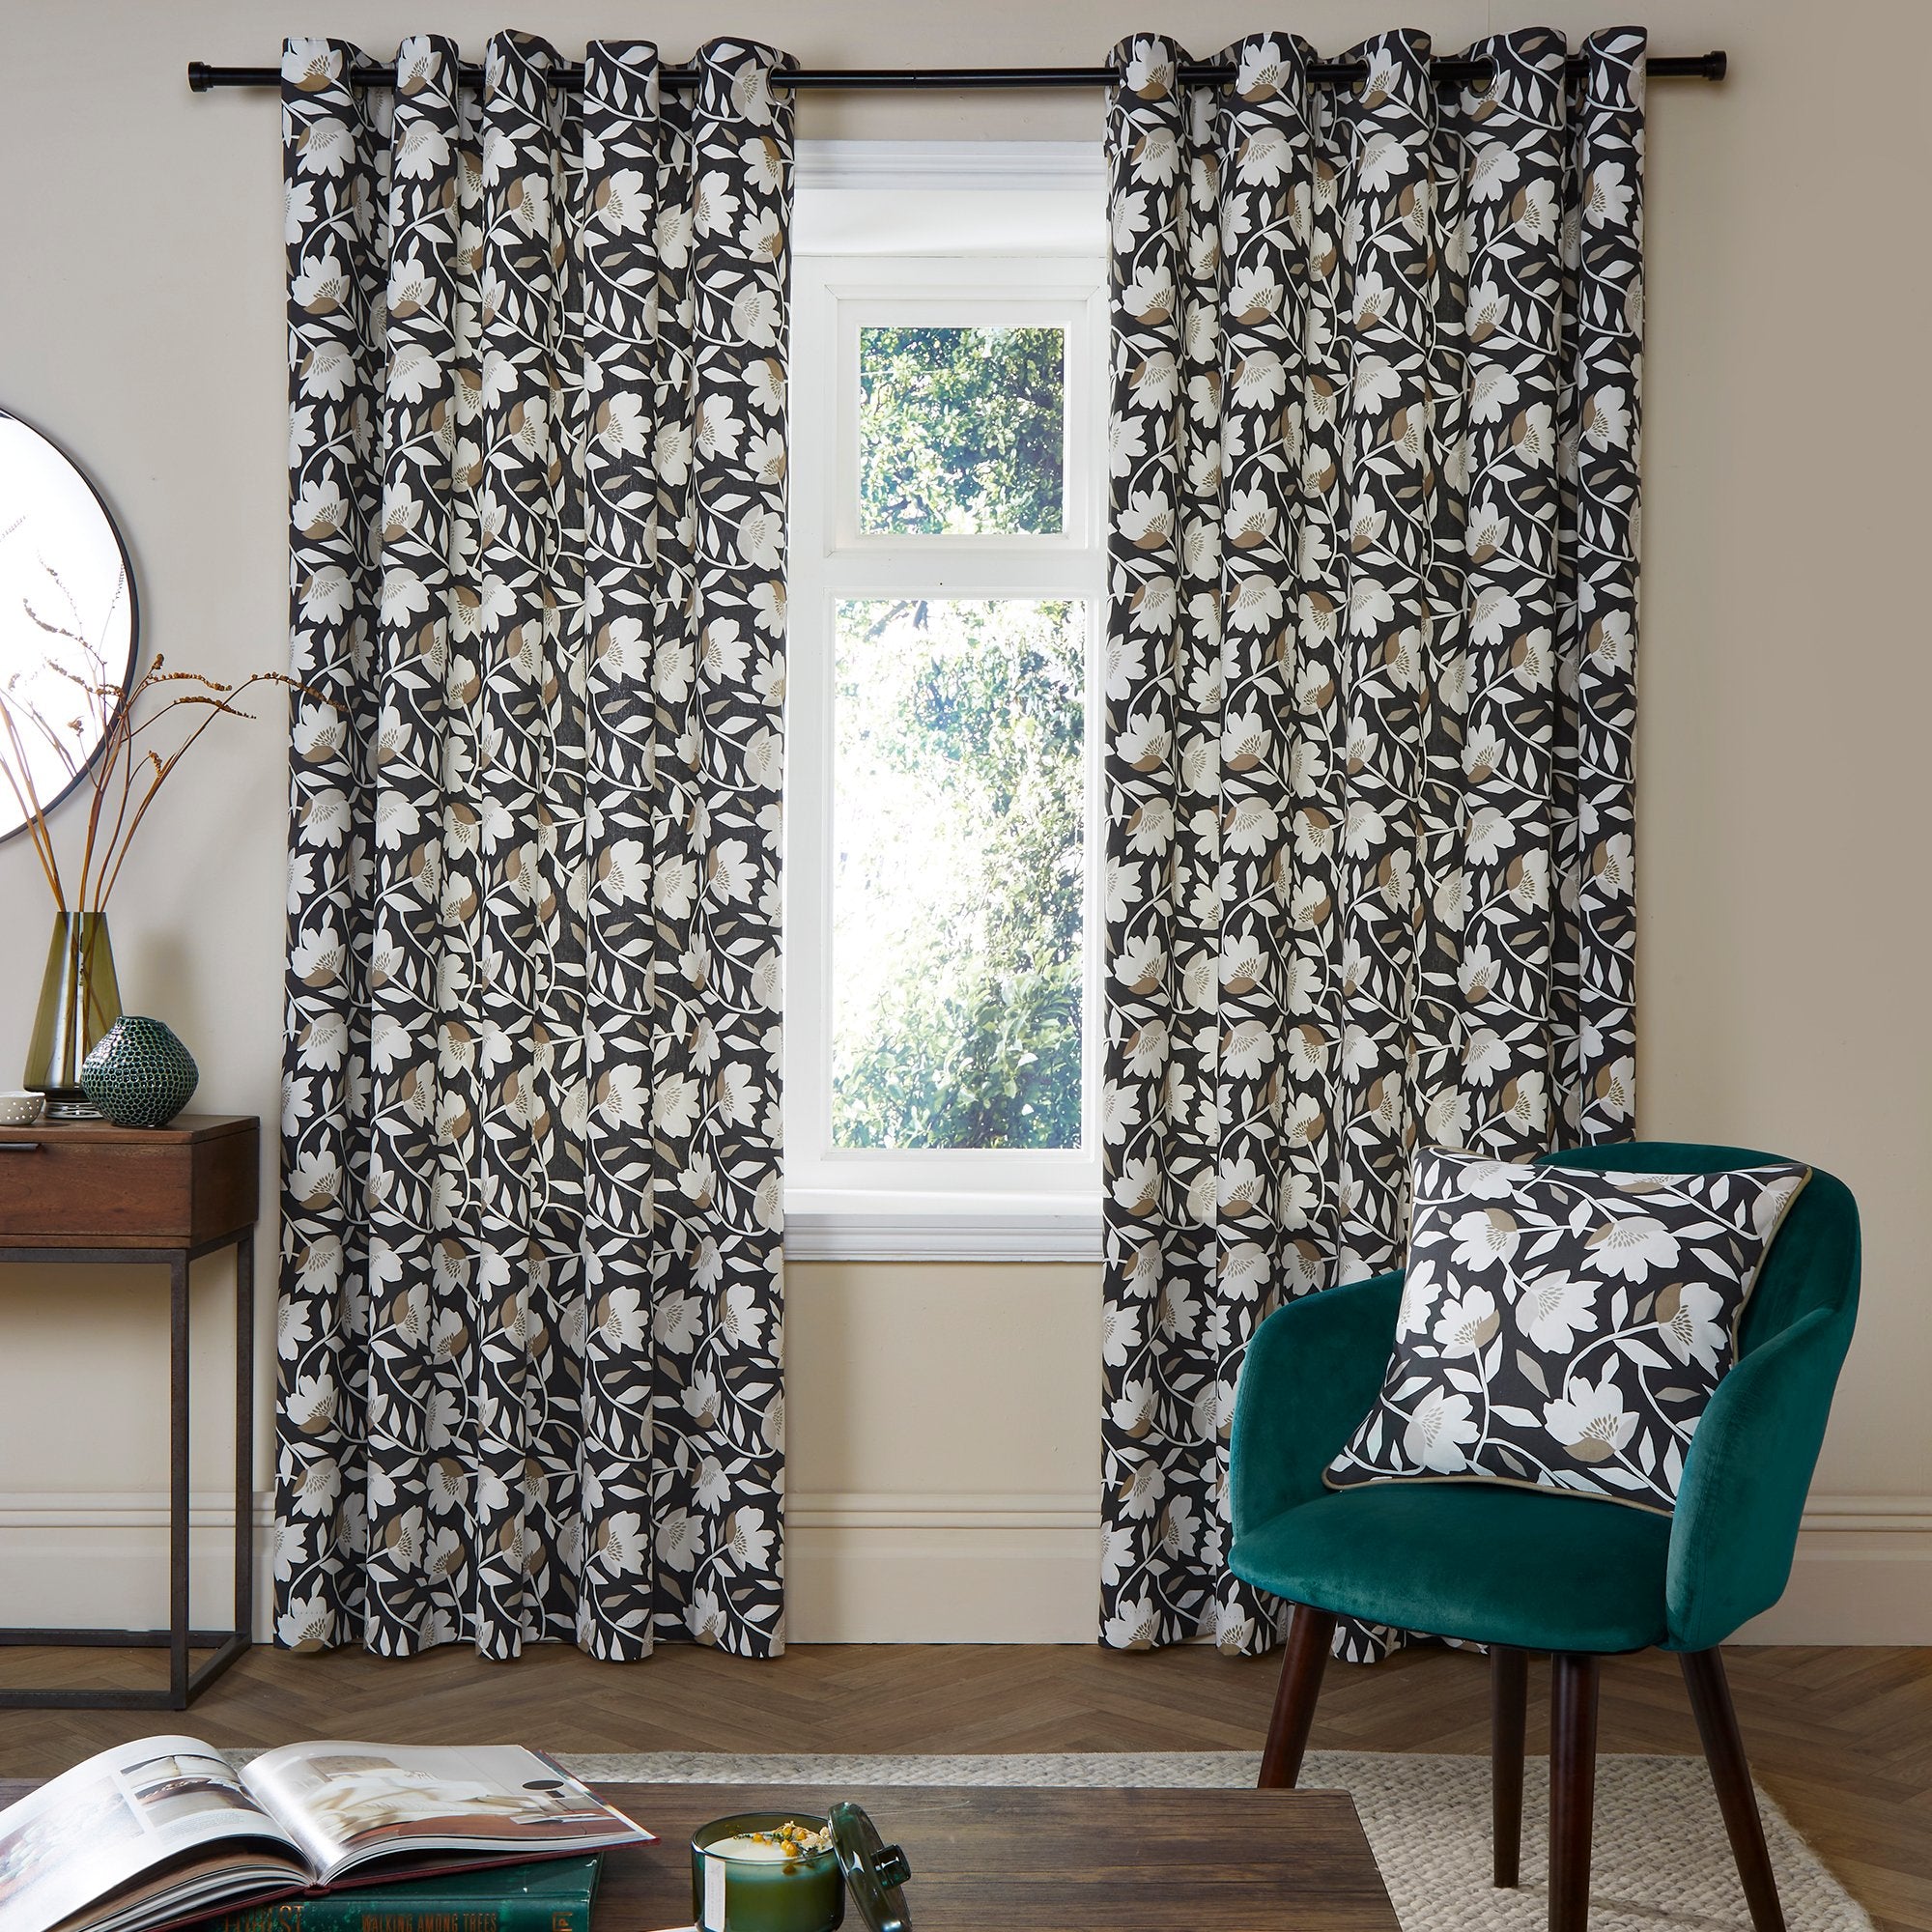 Pair of Eyelet Curtains Luna by Fusion in Black